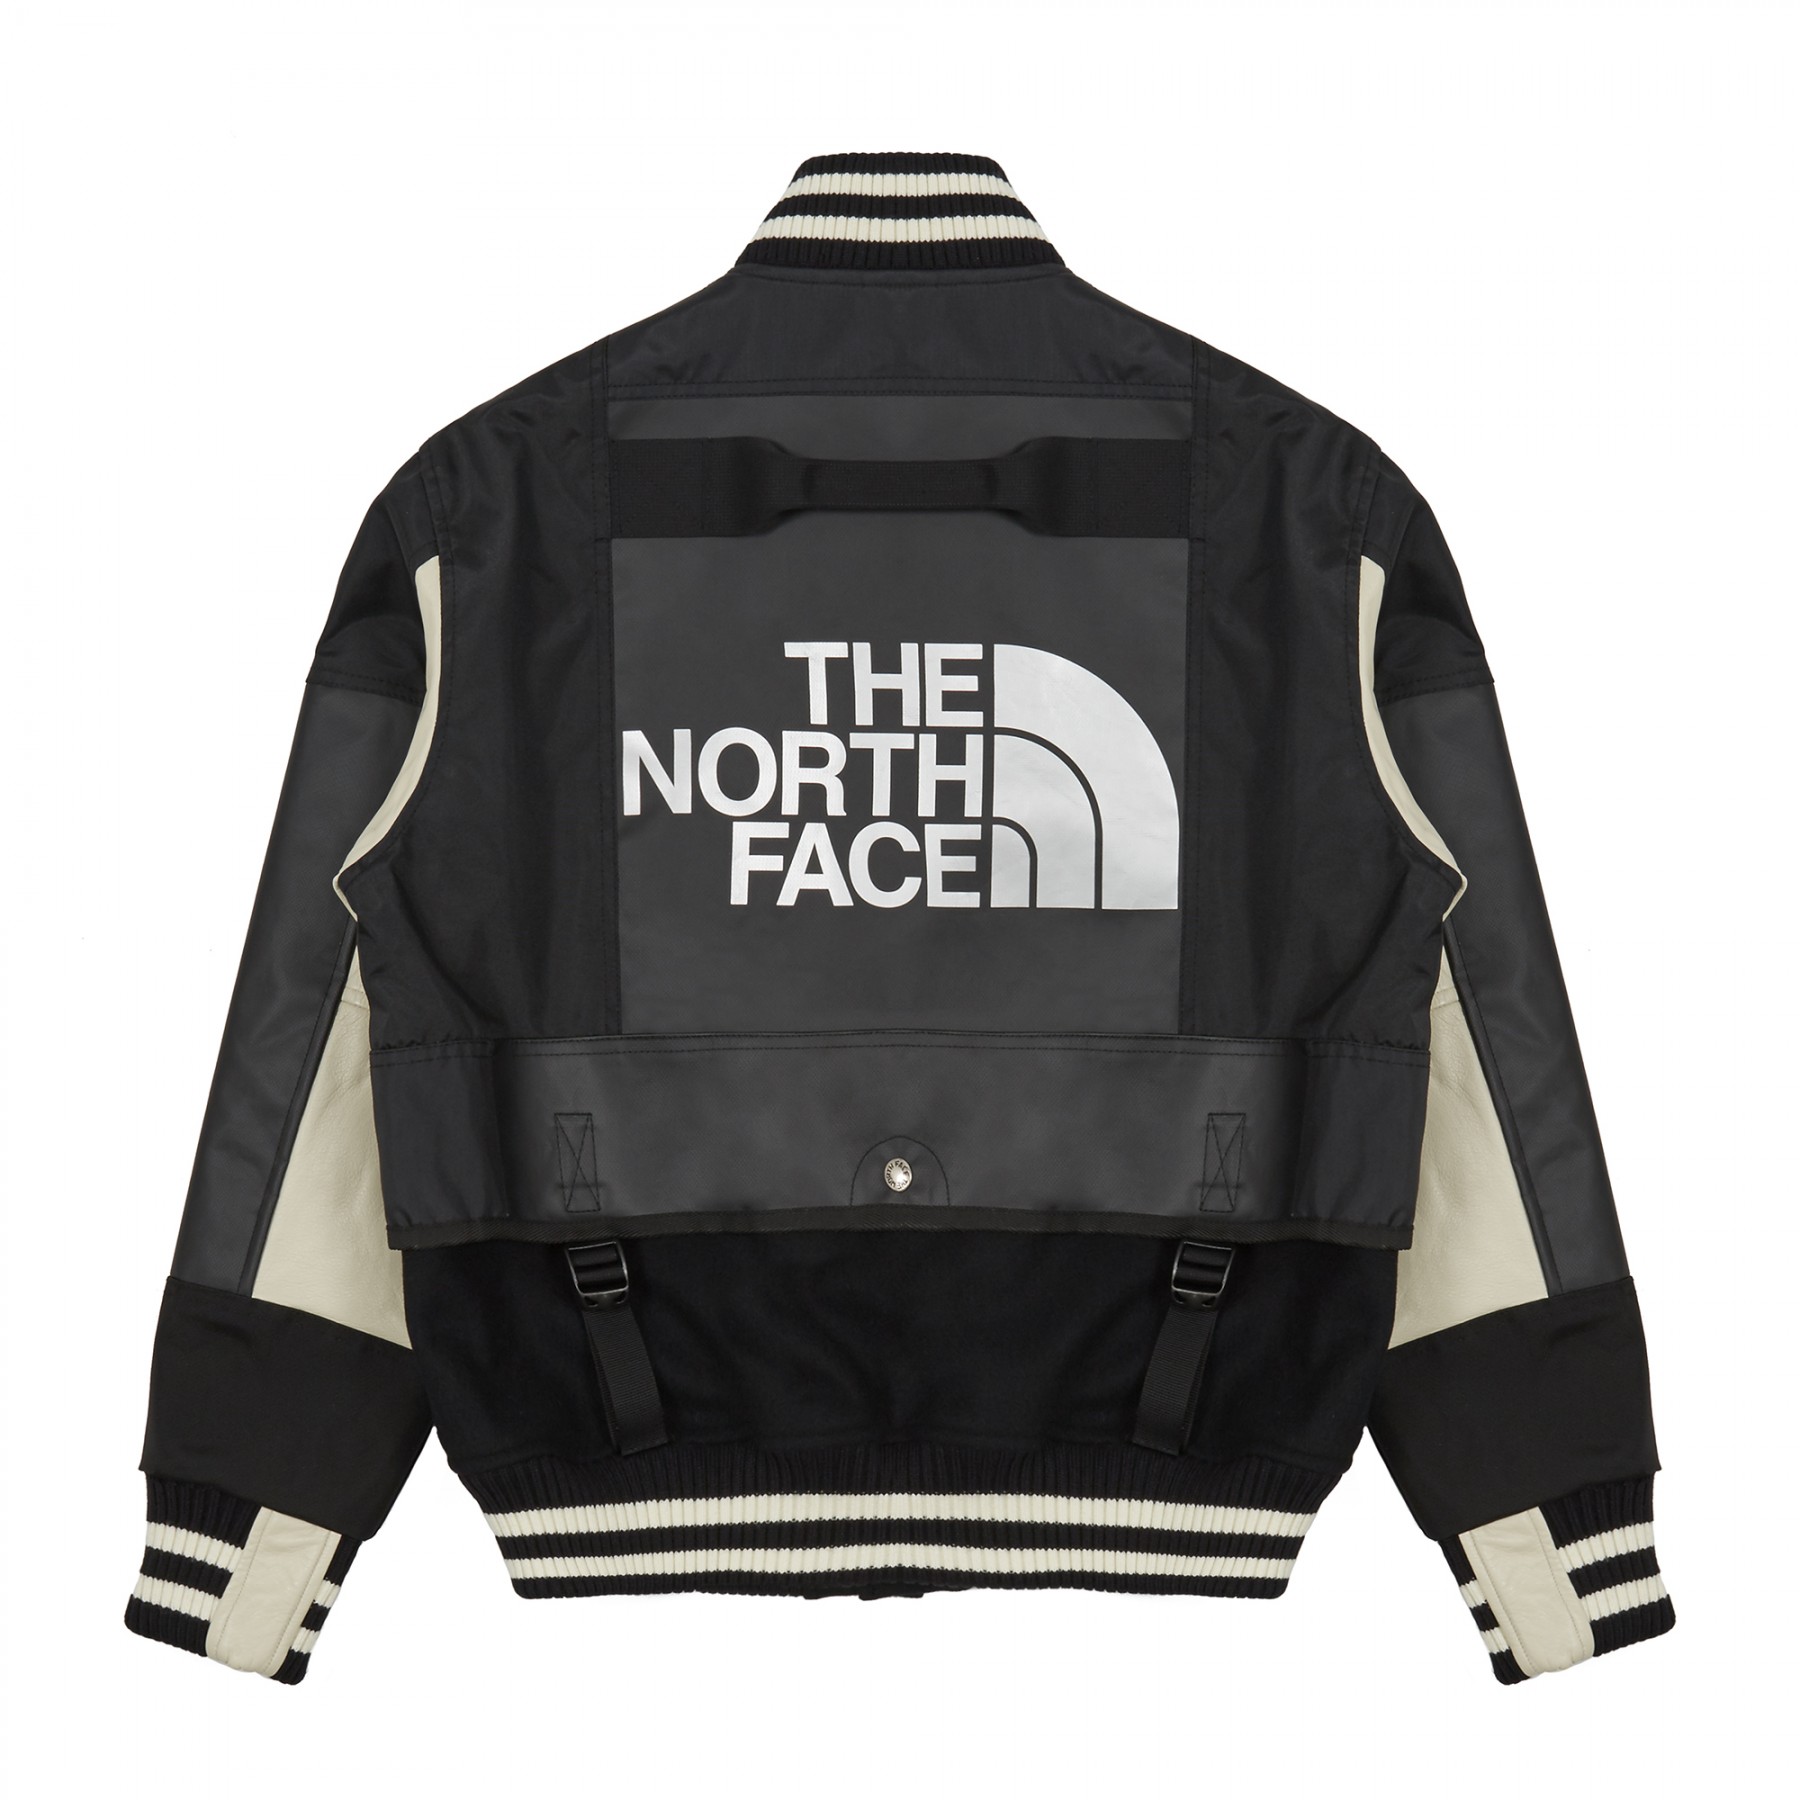 You can now purchase the latest Junya Watanabe MAN x The North 